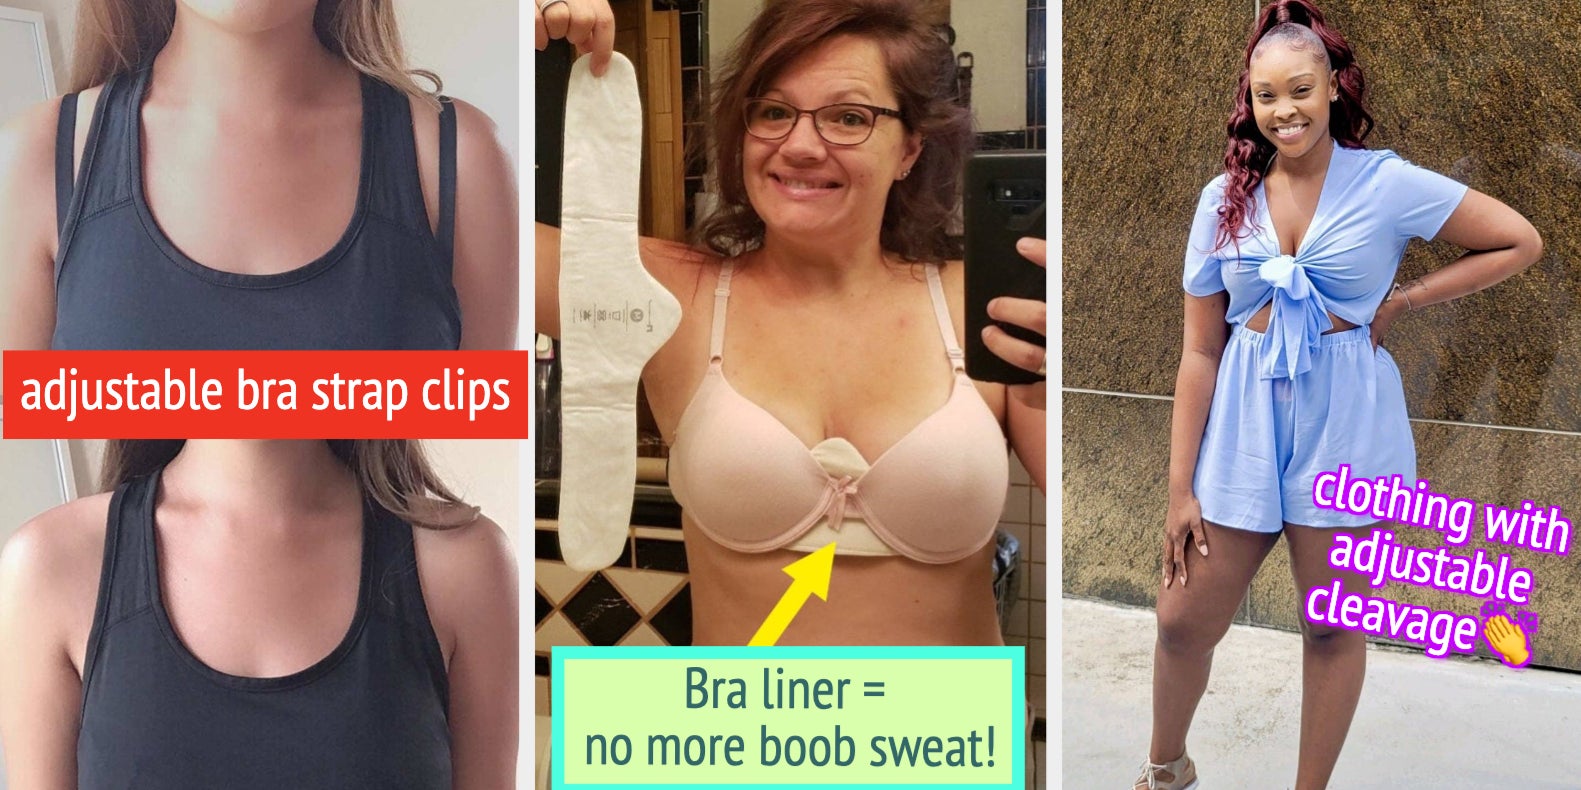 I'm size 22 with 44H boobs - men try to shame me for my curves but I don't  care, I know they're attracted to me